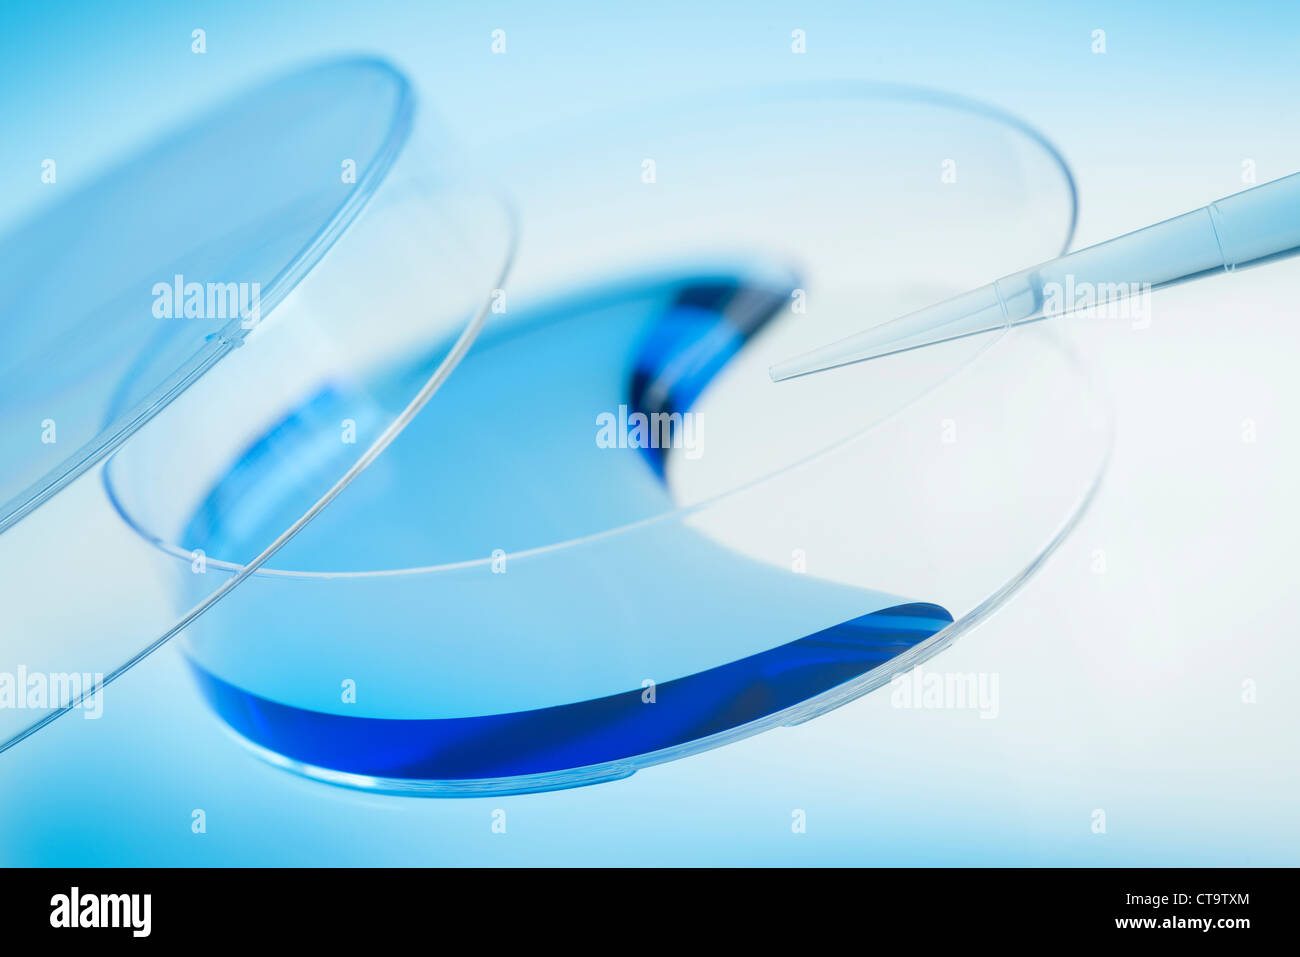 Disposable petri dish containing a blue chemical substance. Stock Photo